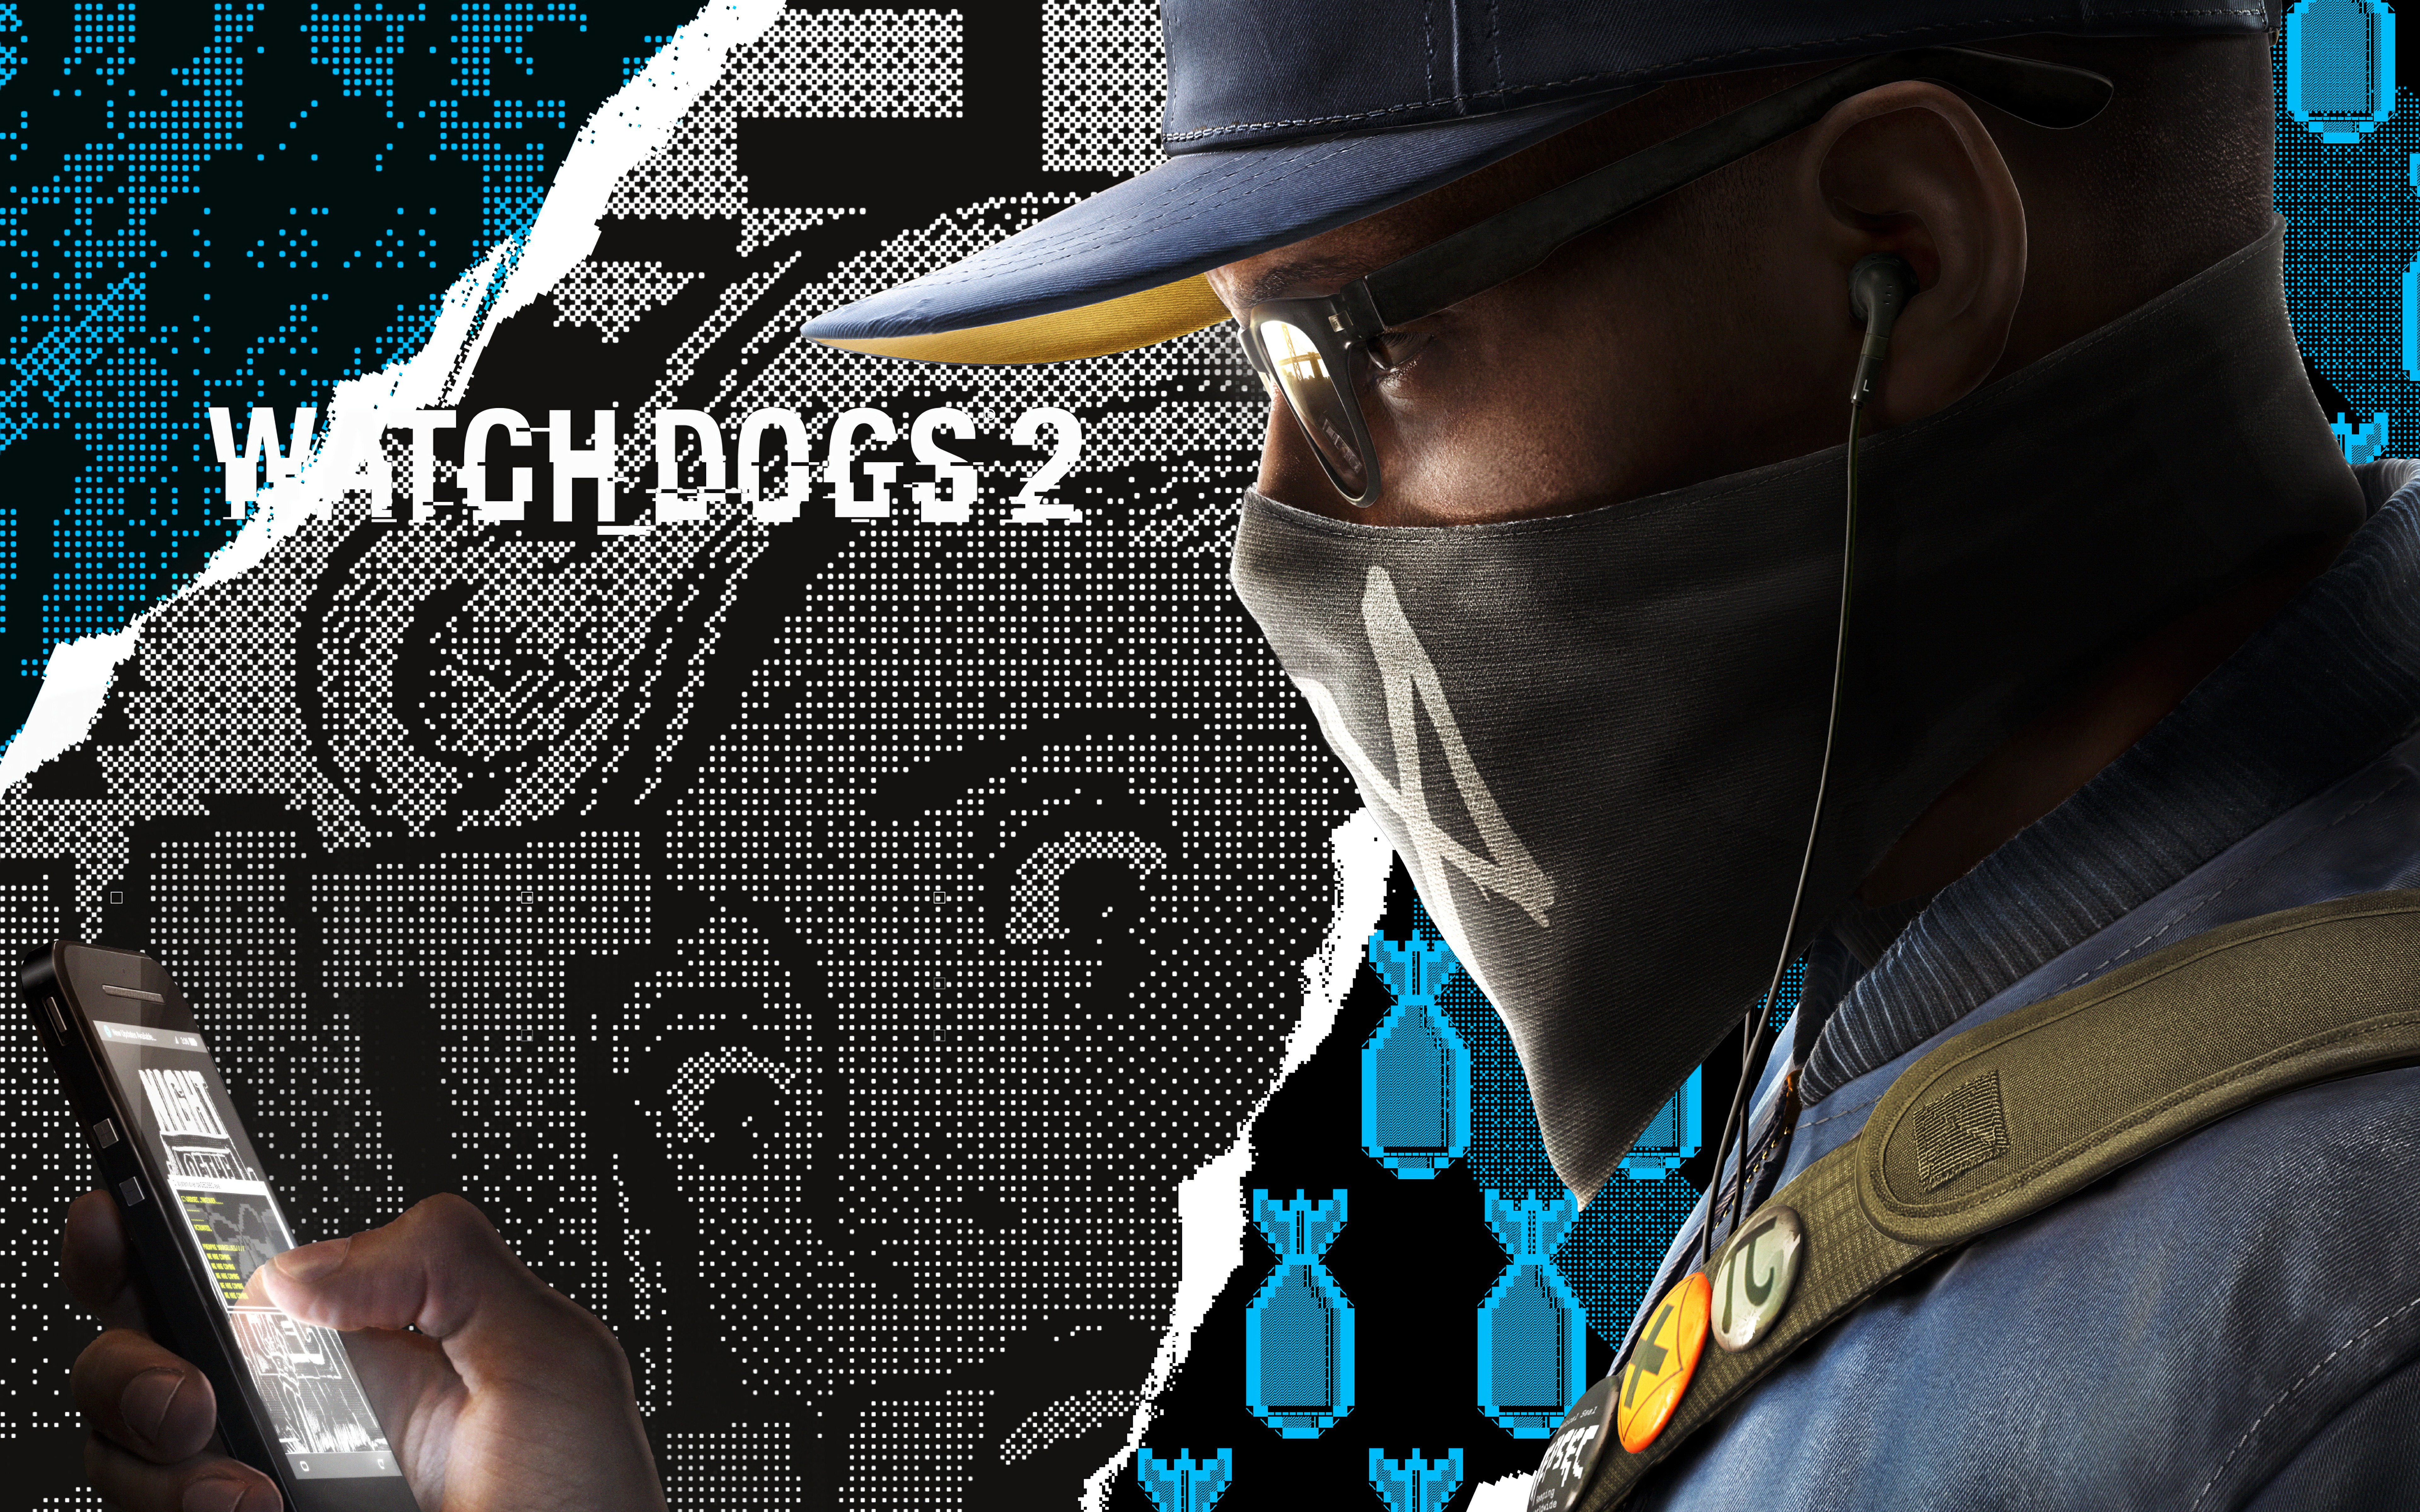 Watch Dogs Wallpaper Image Photos Pictures